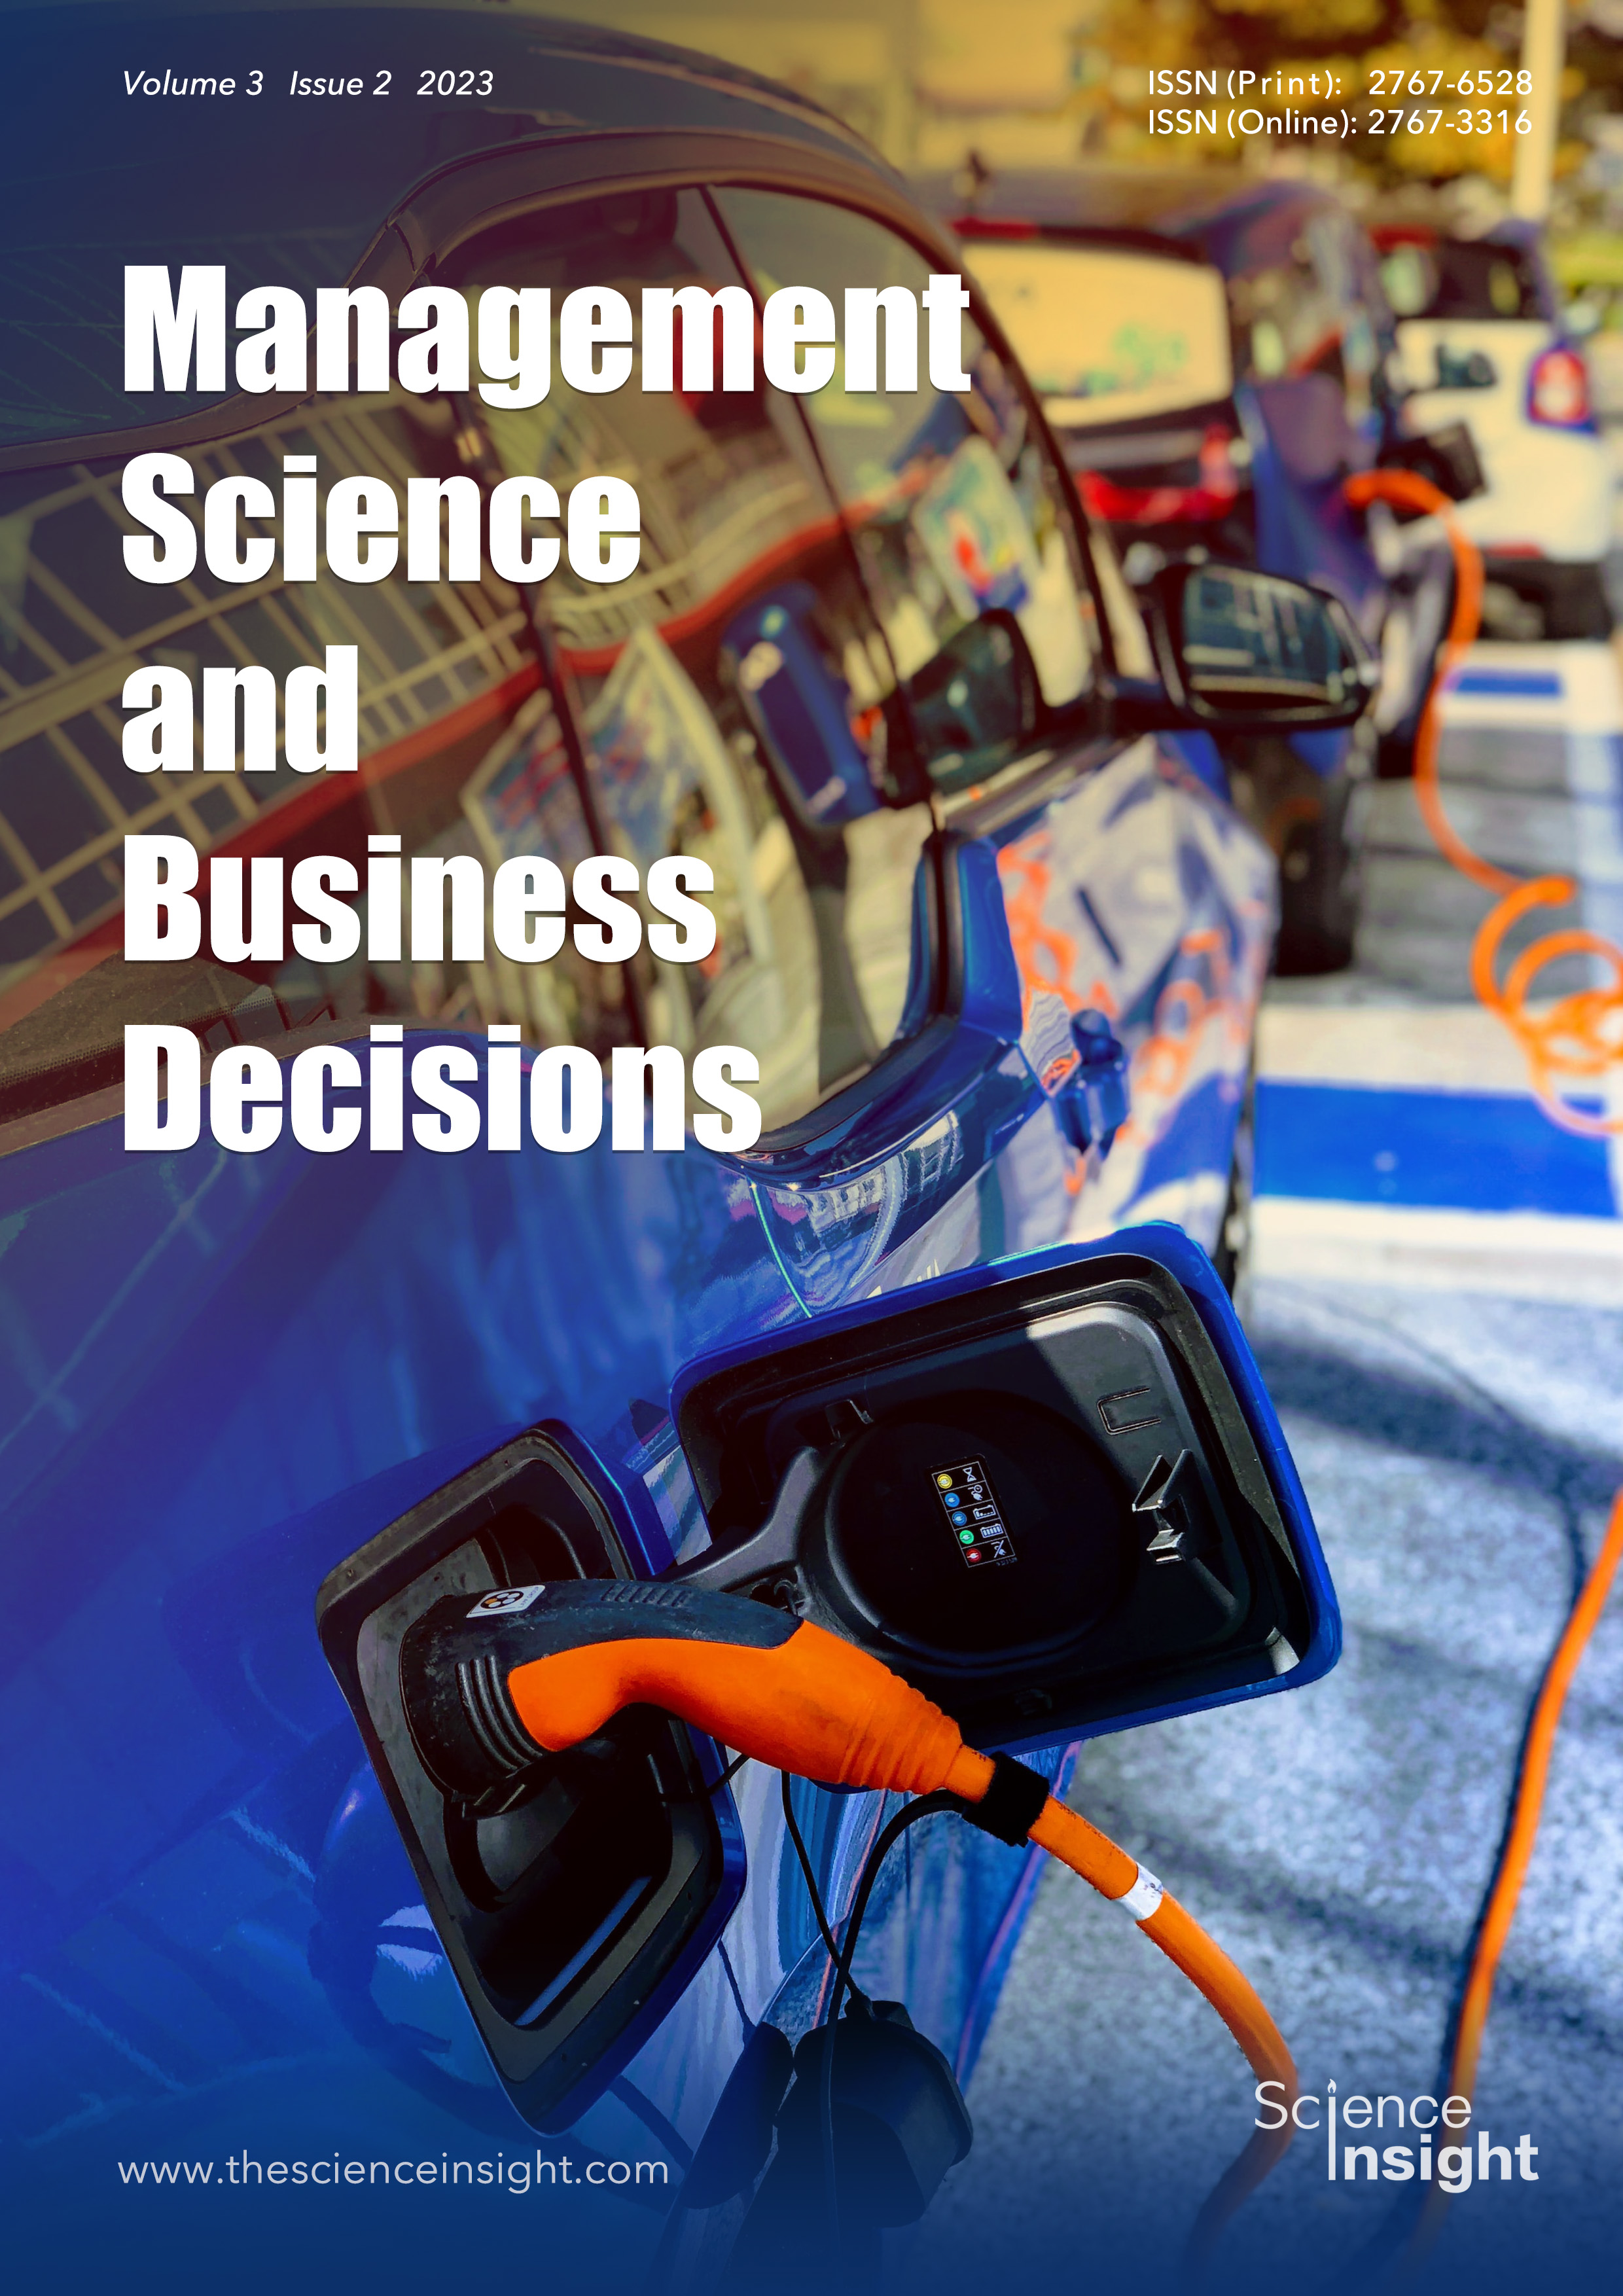 Management Science and Business Decisions: Vol. 3, No. 2, 2023